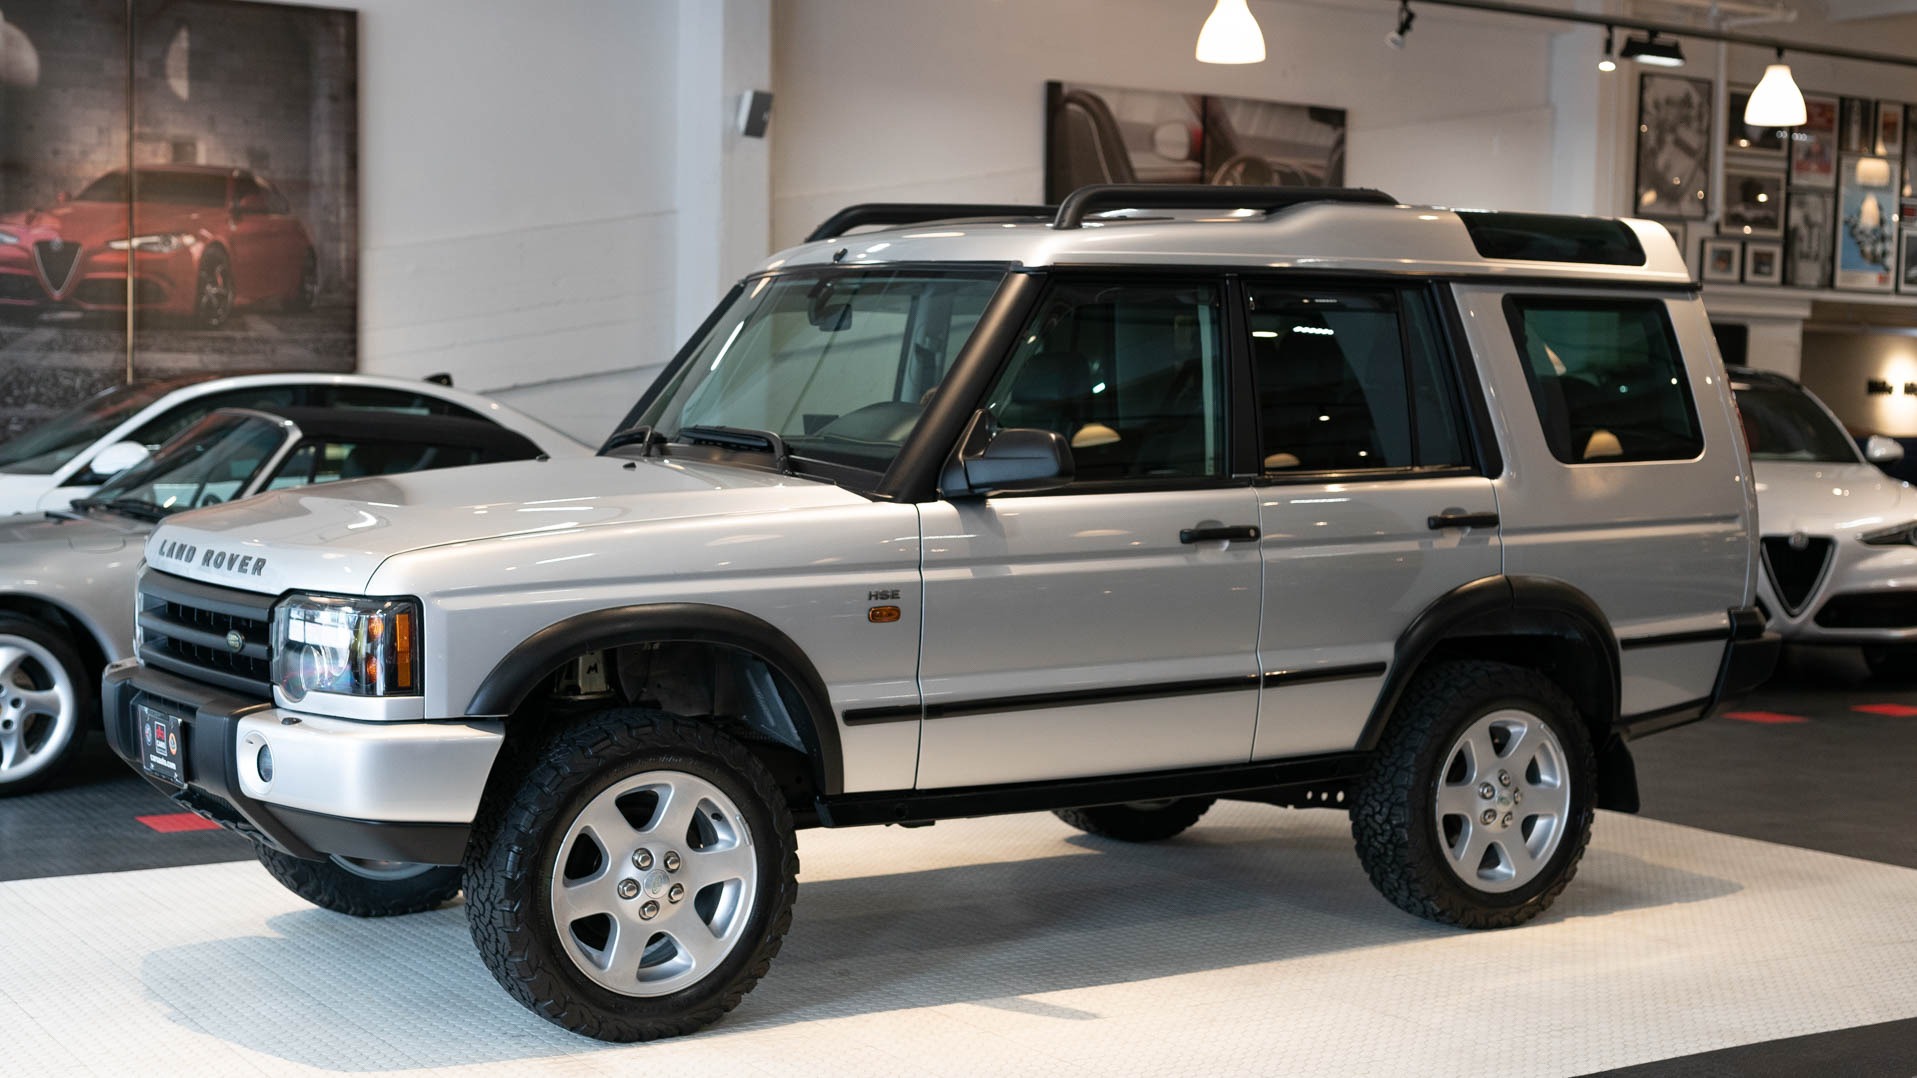 Used 2004 Land Rover Discovery Hse For Sale 19 900 Cars Dawydiak Stock 180901c